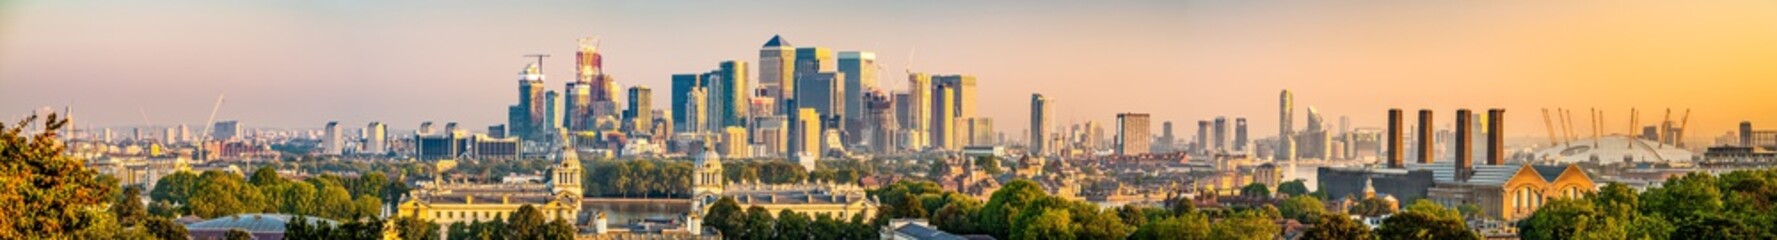 Morning panorama of Canary Wharf in London,England